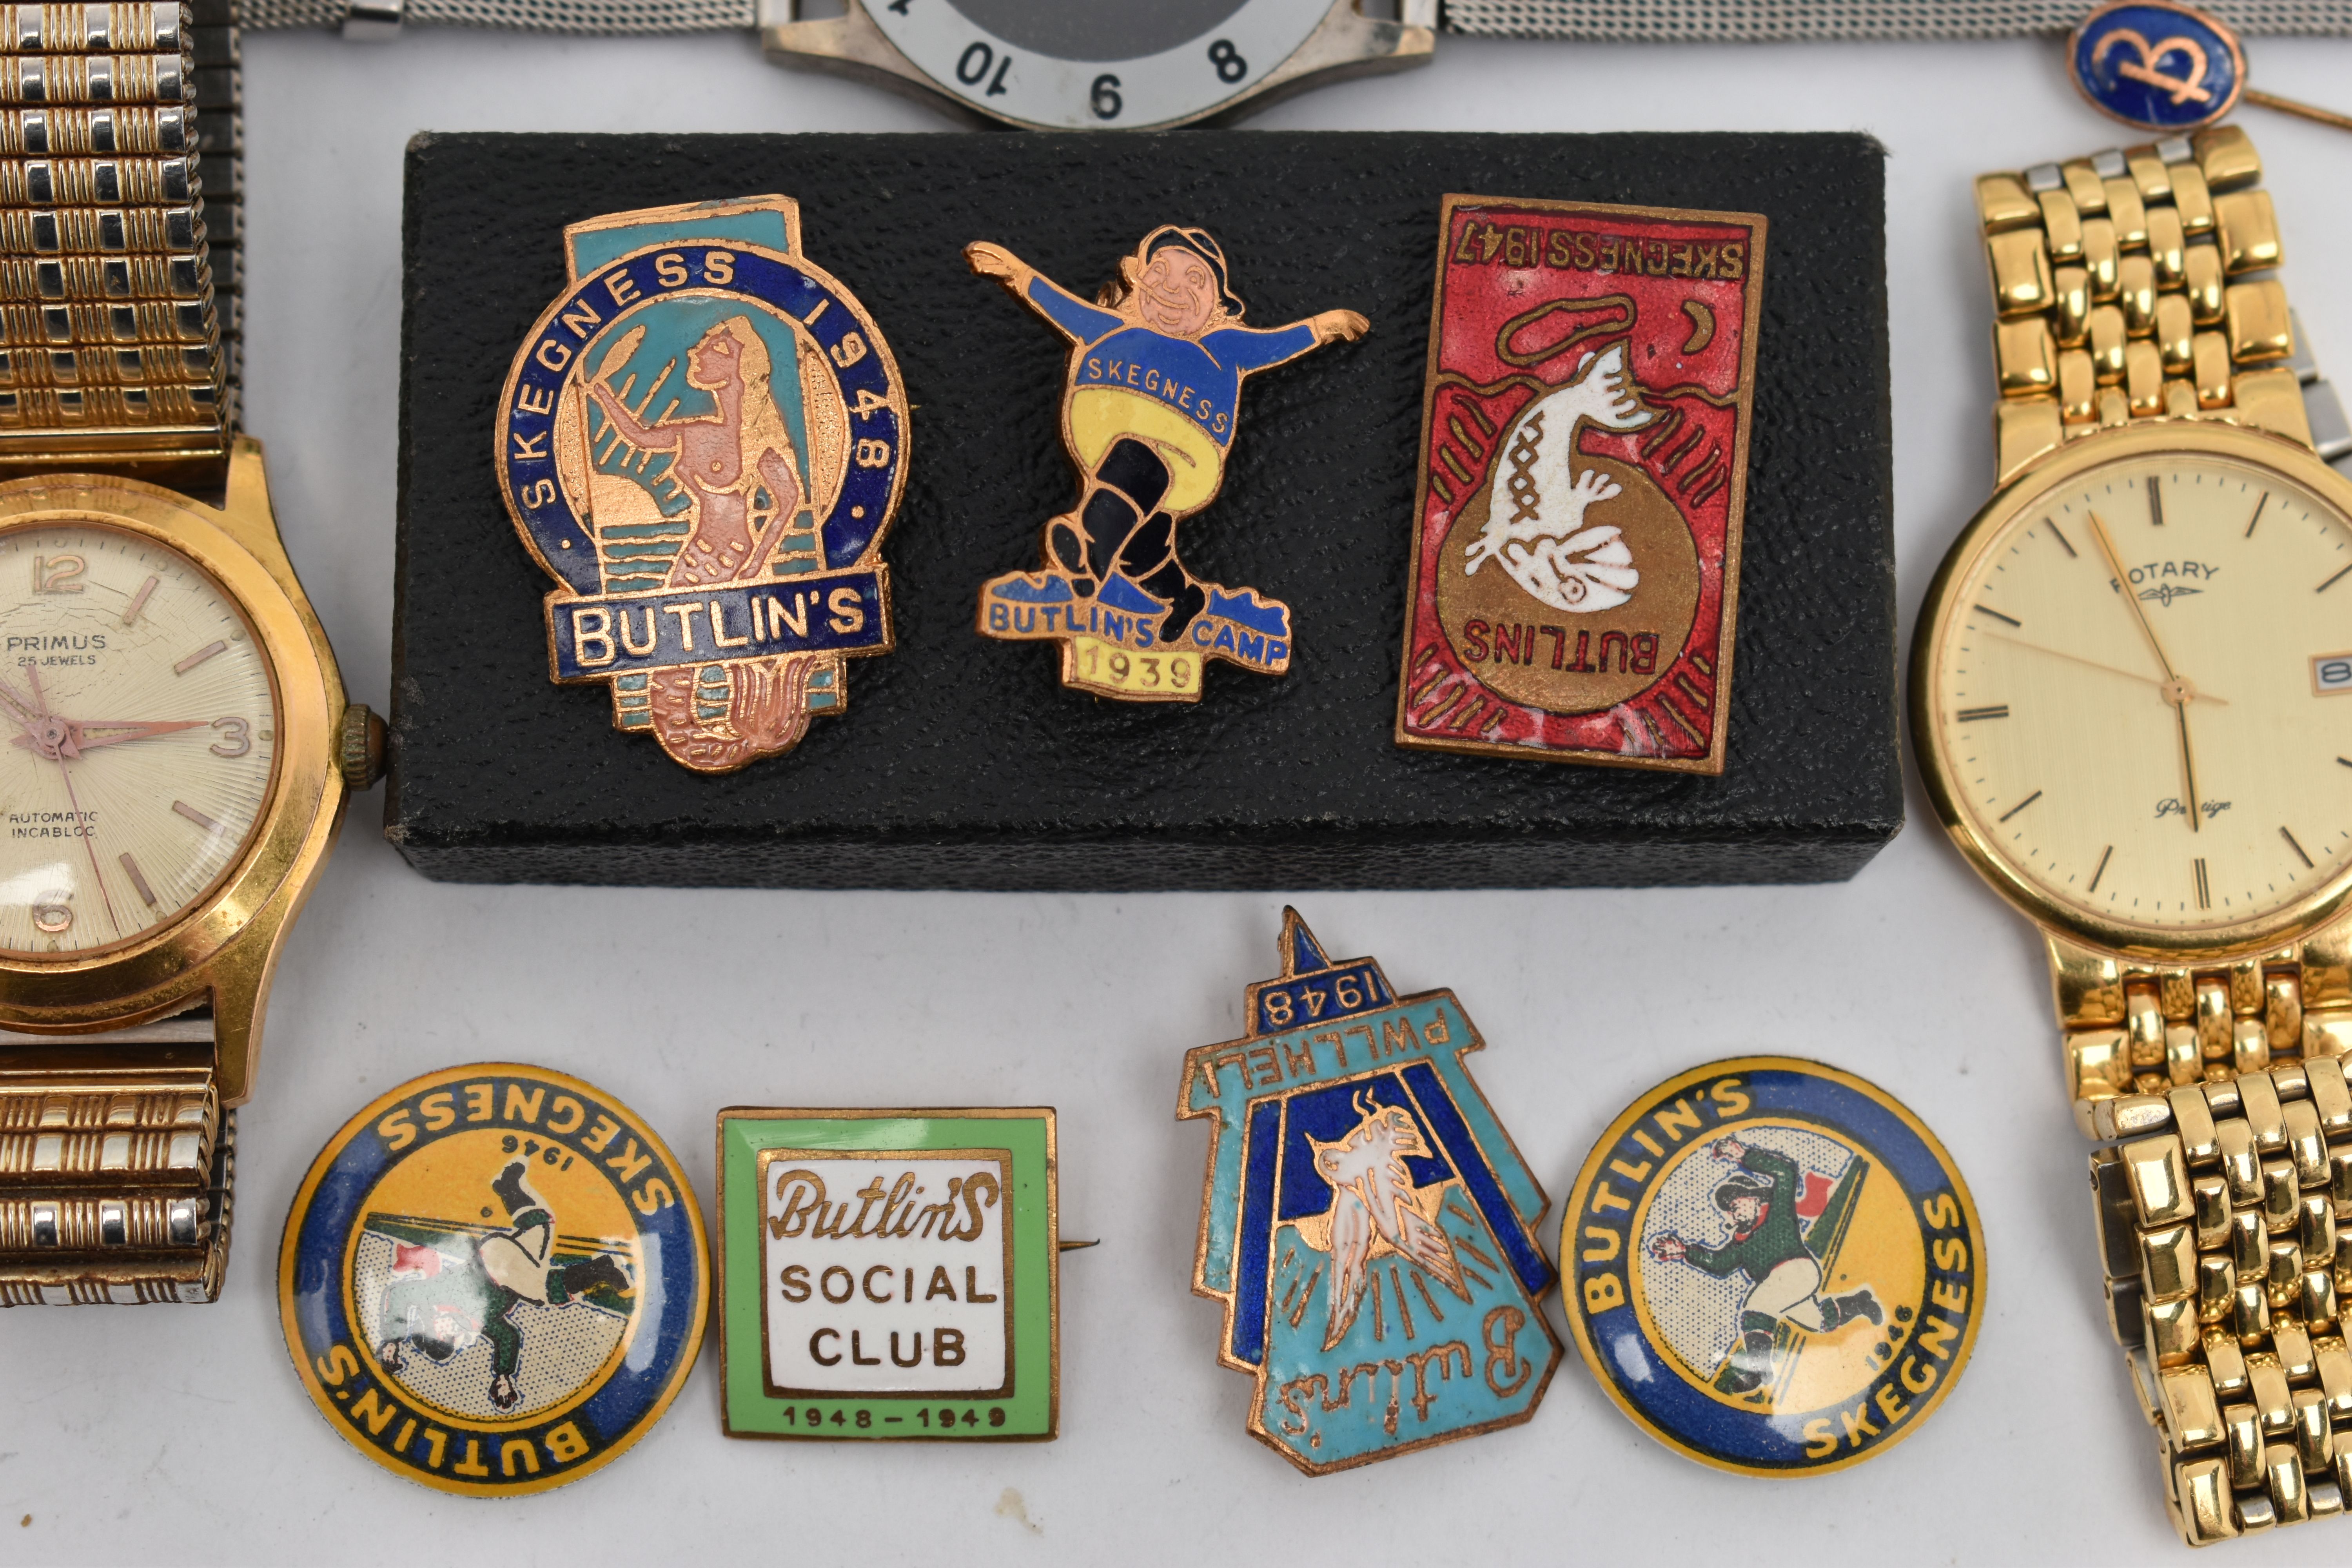 A COLLECTION OF 'BUTLINS' PINS AND ASSORTED WATCHES, eight Butlins pins and badges, dated between - Image 3 of 5